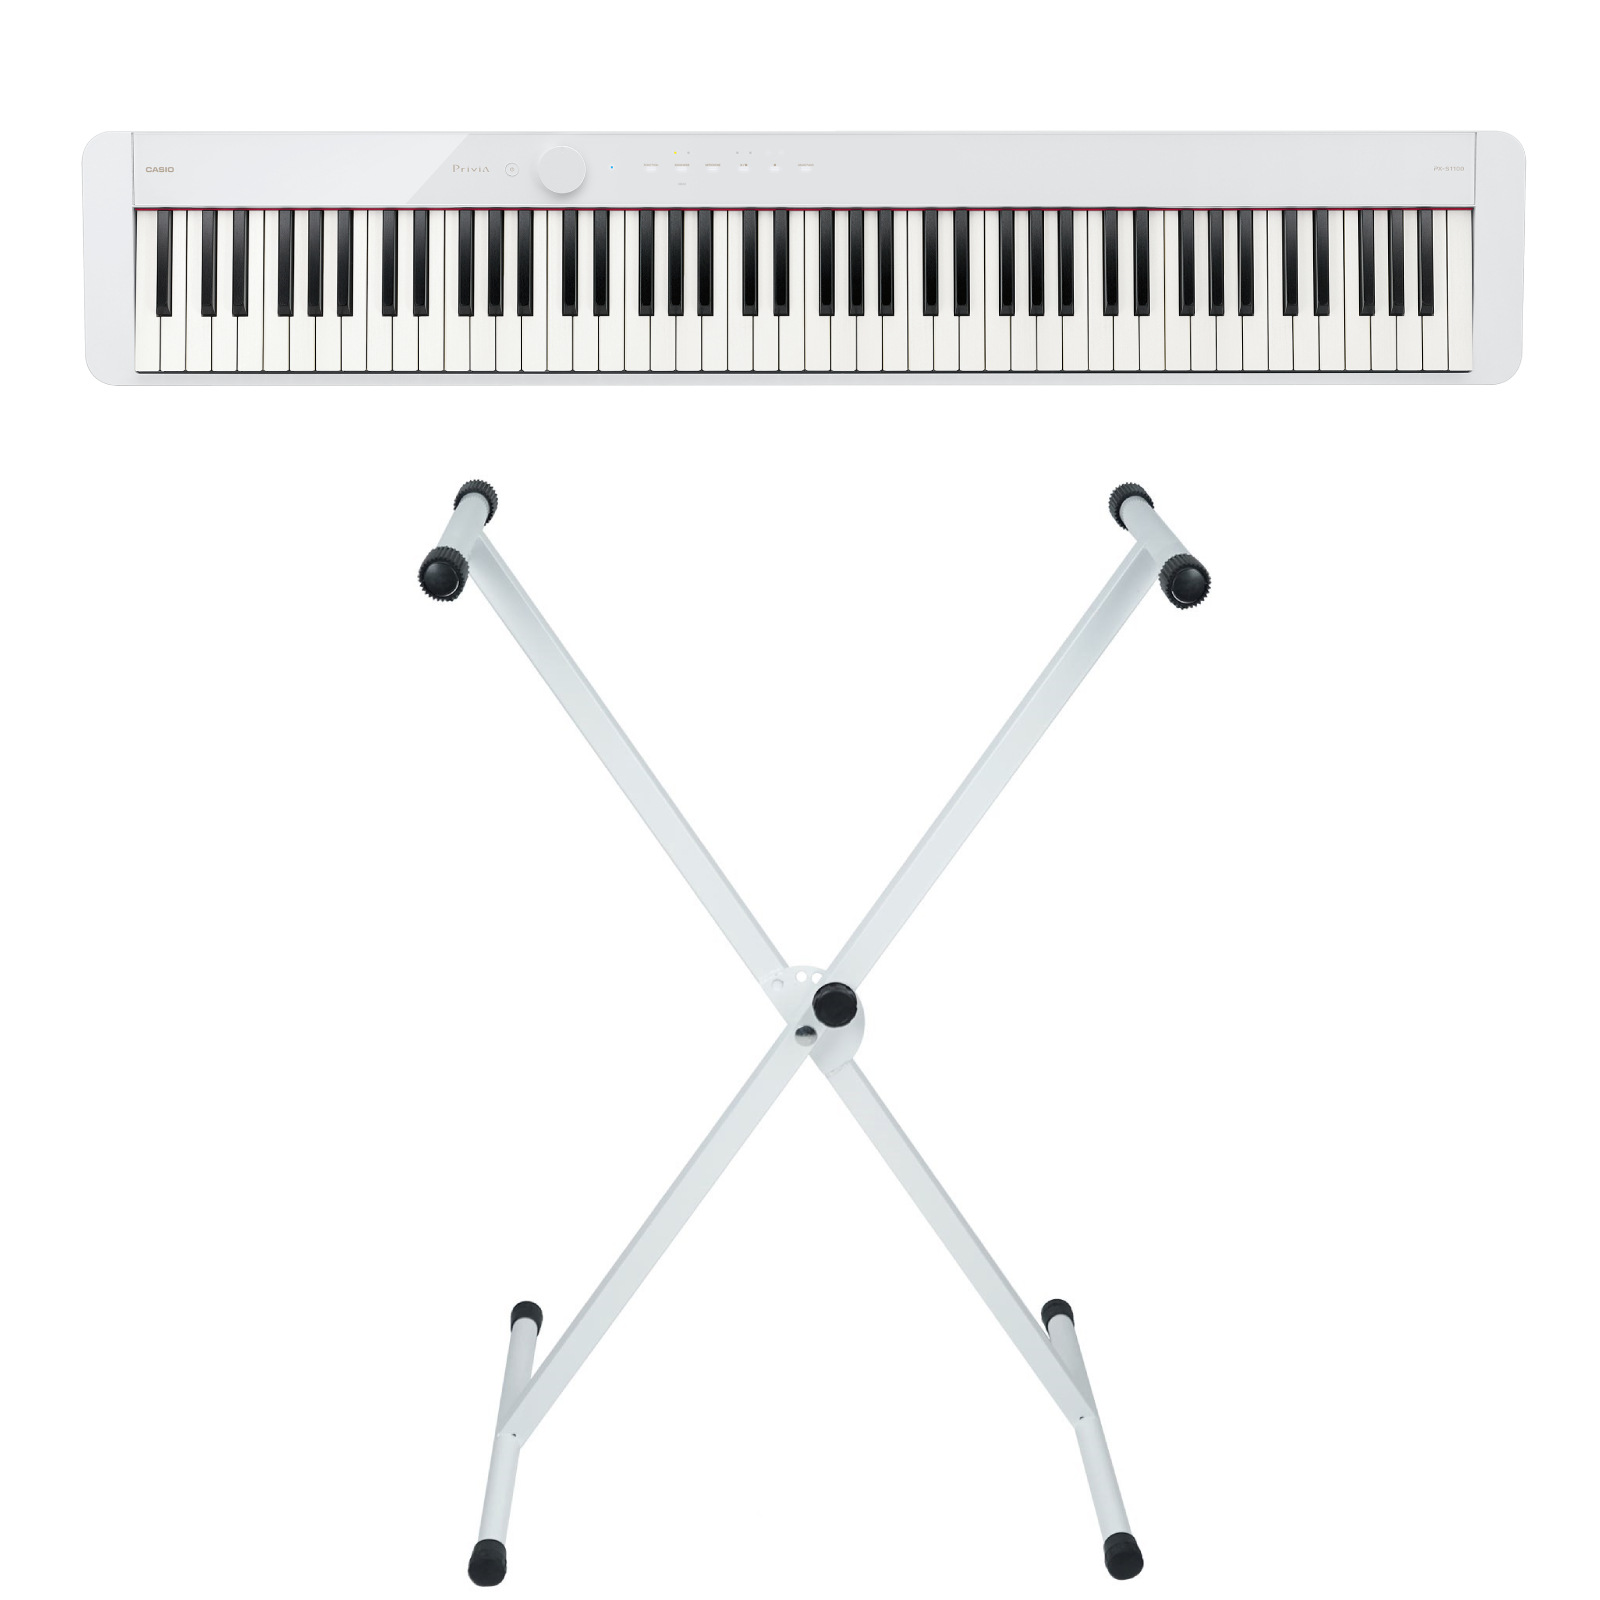 CASIO PRIVIA PX-S1100 WH + STAND KST-30 WH